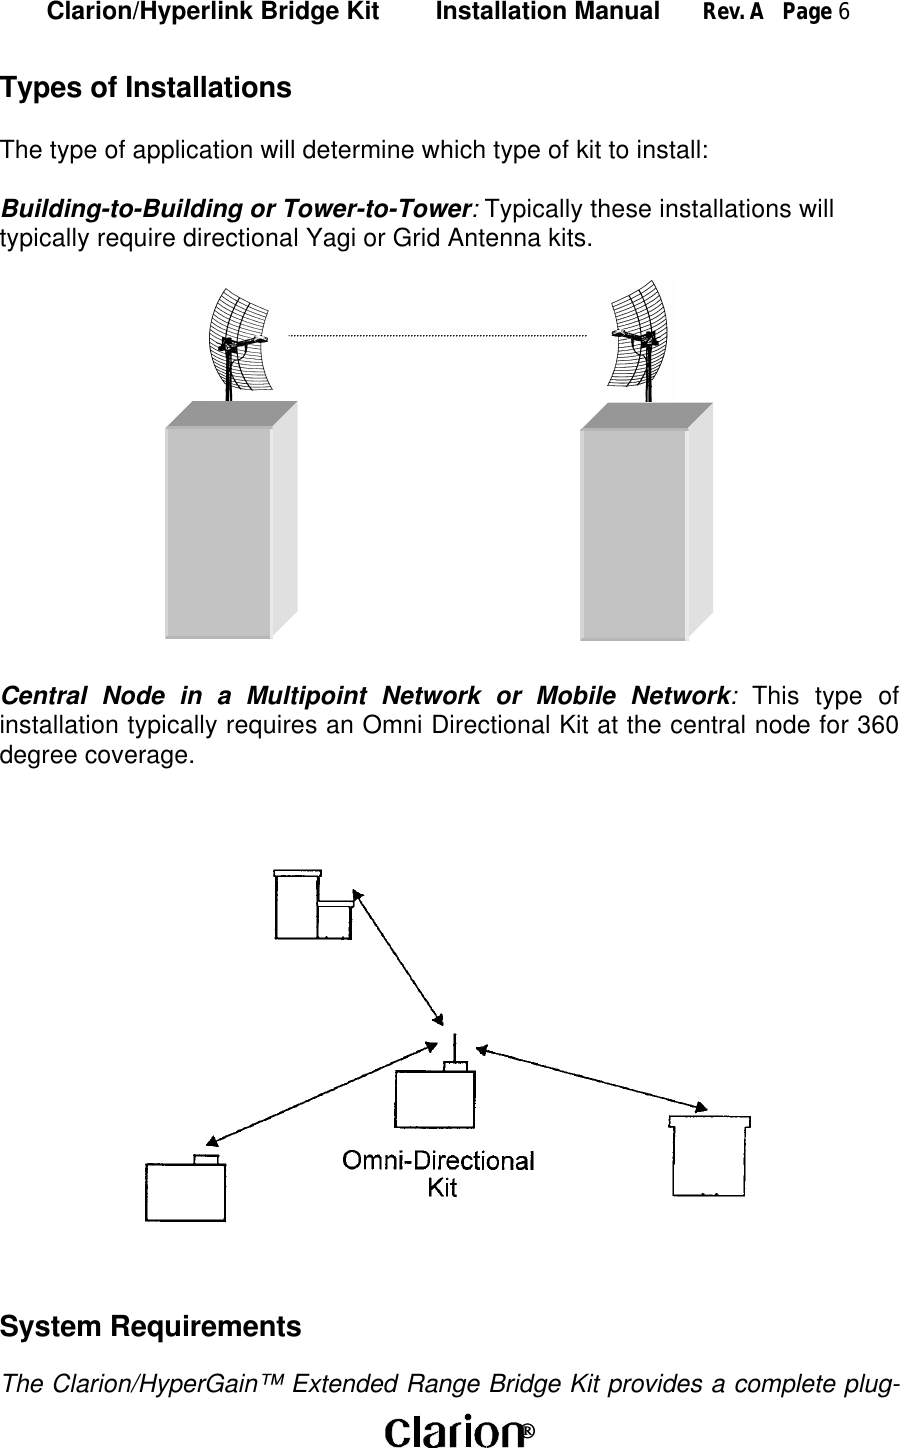 Clarion/Hyperlink Bridge Kit        Installation Manual      Rev. A   Page 6 Types of InstallationsThe type of application will determine which type of kit to install:Building-to-Building or Tower-to-Tower: Typically these installations willtypically require directional Yagi or Grid Antenna kits.Central Node in a Multipoint Network or Mobile Network: This type ofinstallation typically requires an Omni Directional Kit at the central node for 360degree coverage.System RequirementsThe Clarion/HyperGain™ Extended Range Bridge Kit provides a complete plug-